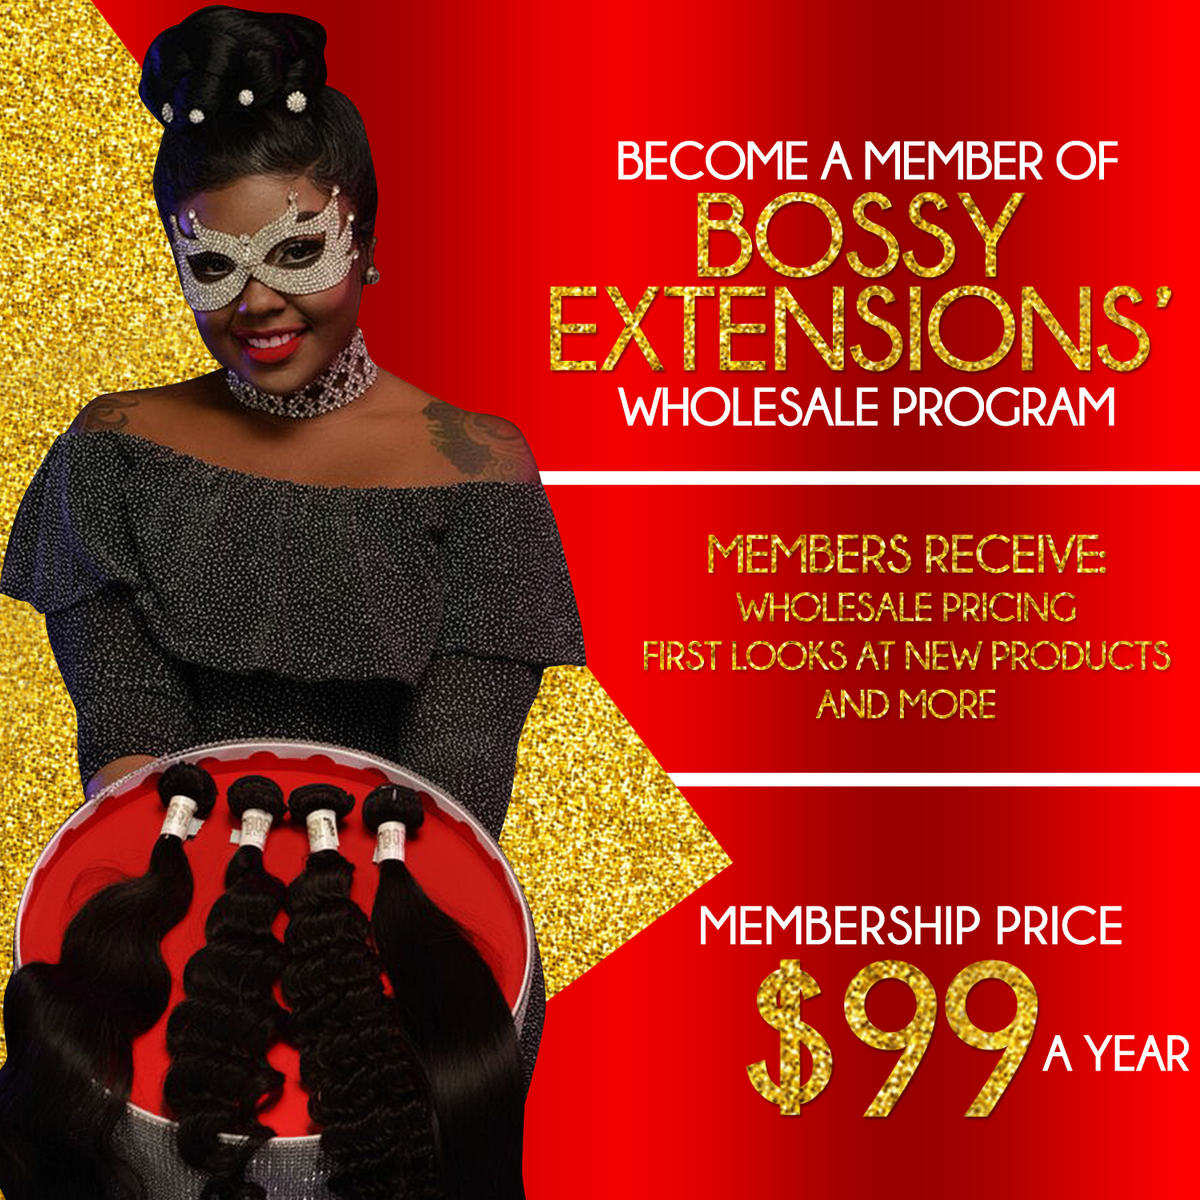 BOSSY EXTENSIONS WHOLESALE